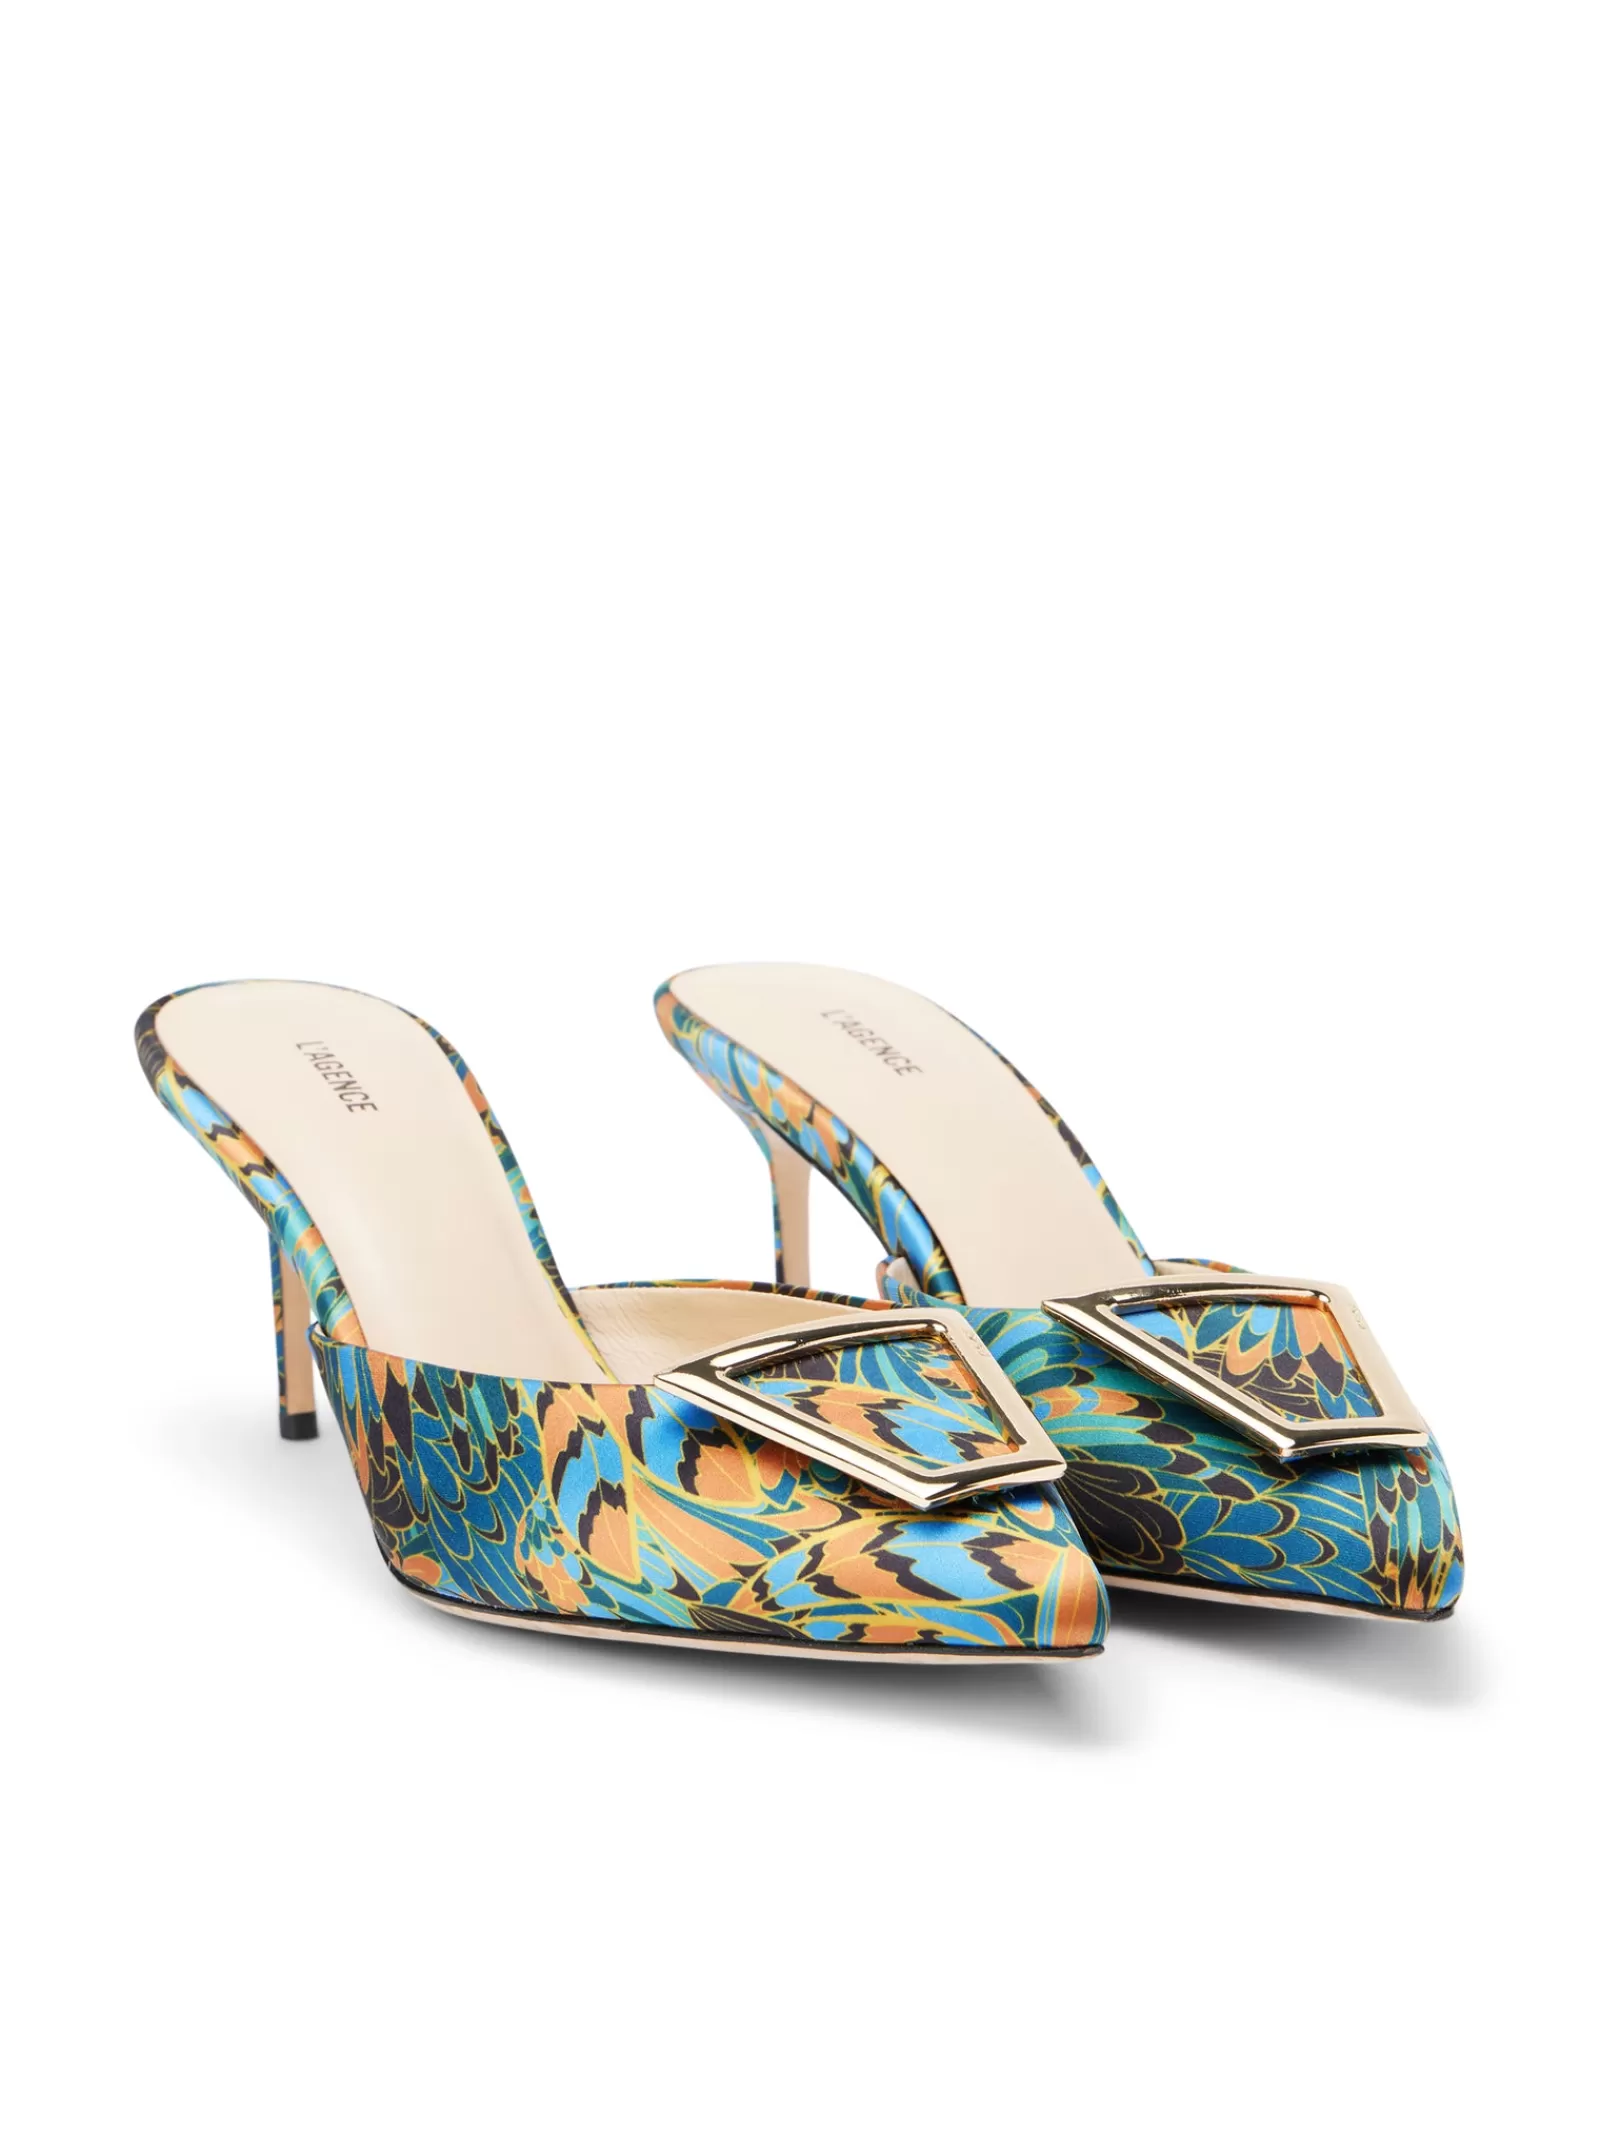 L'AGENCE Charlene Mule< Resort Collection | Print Edition